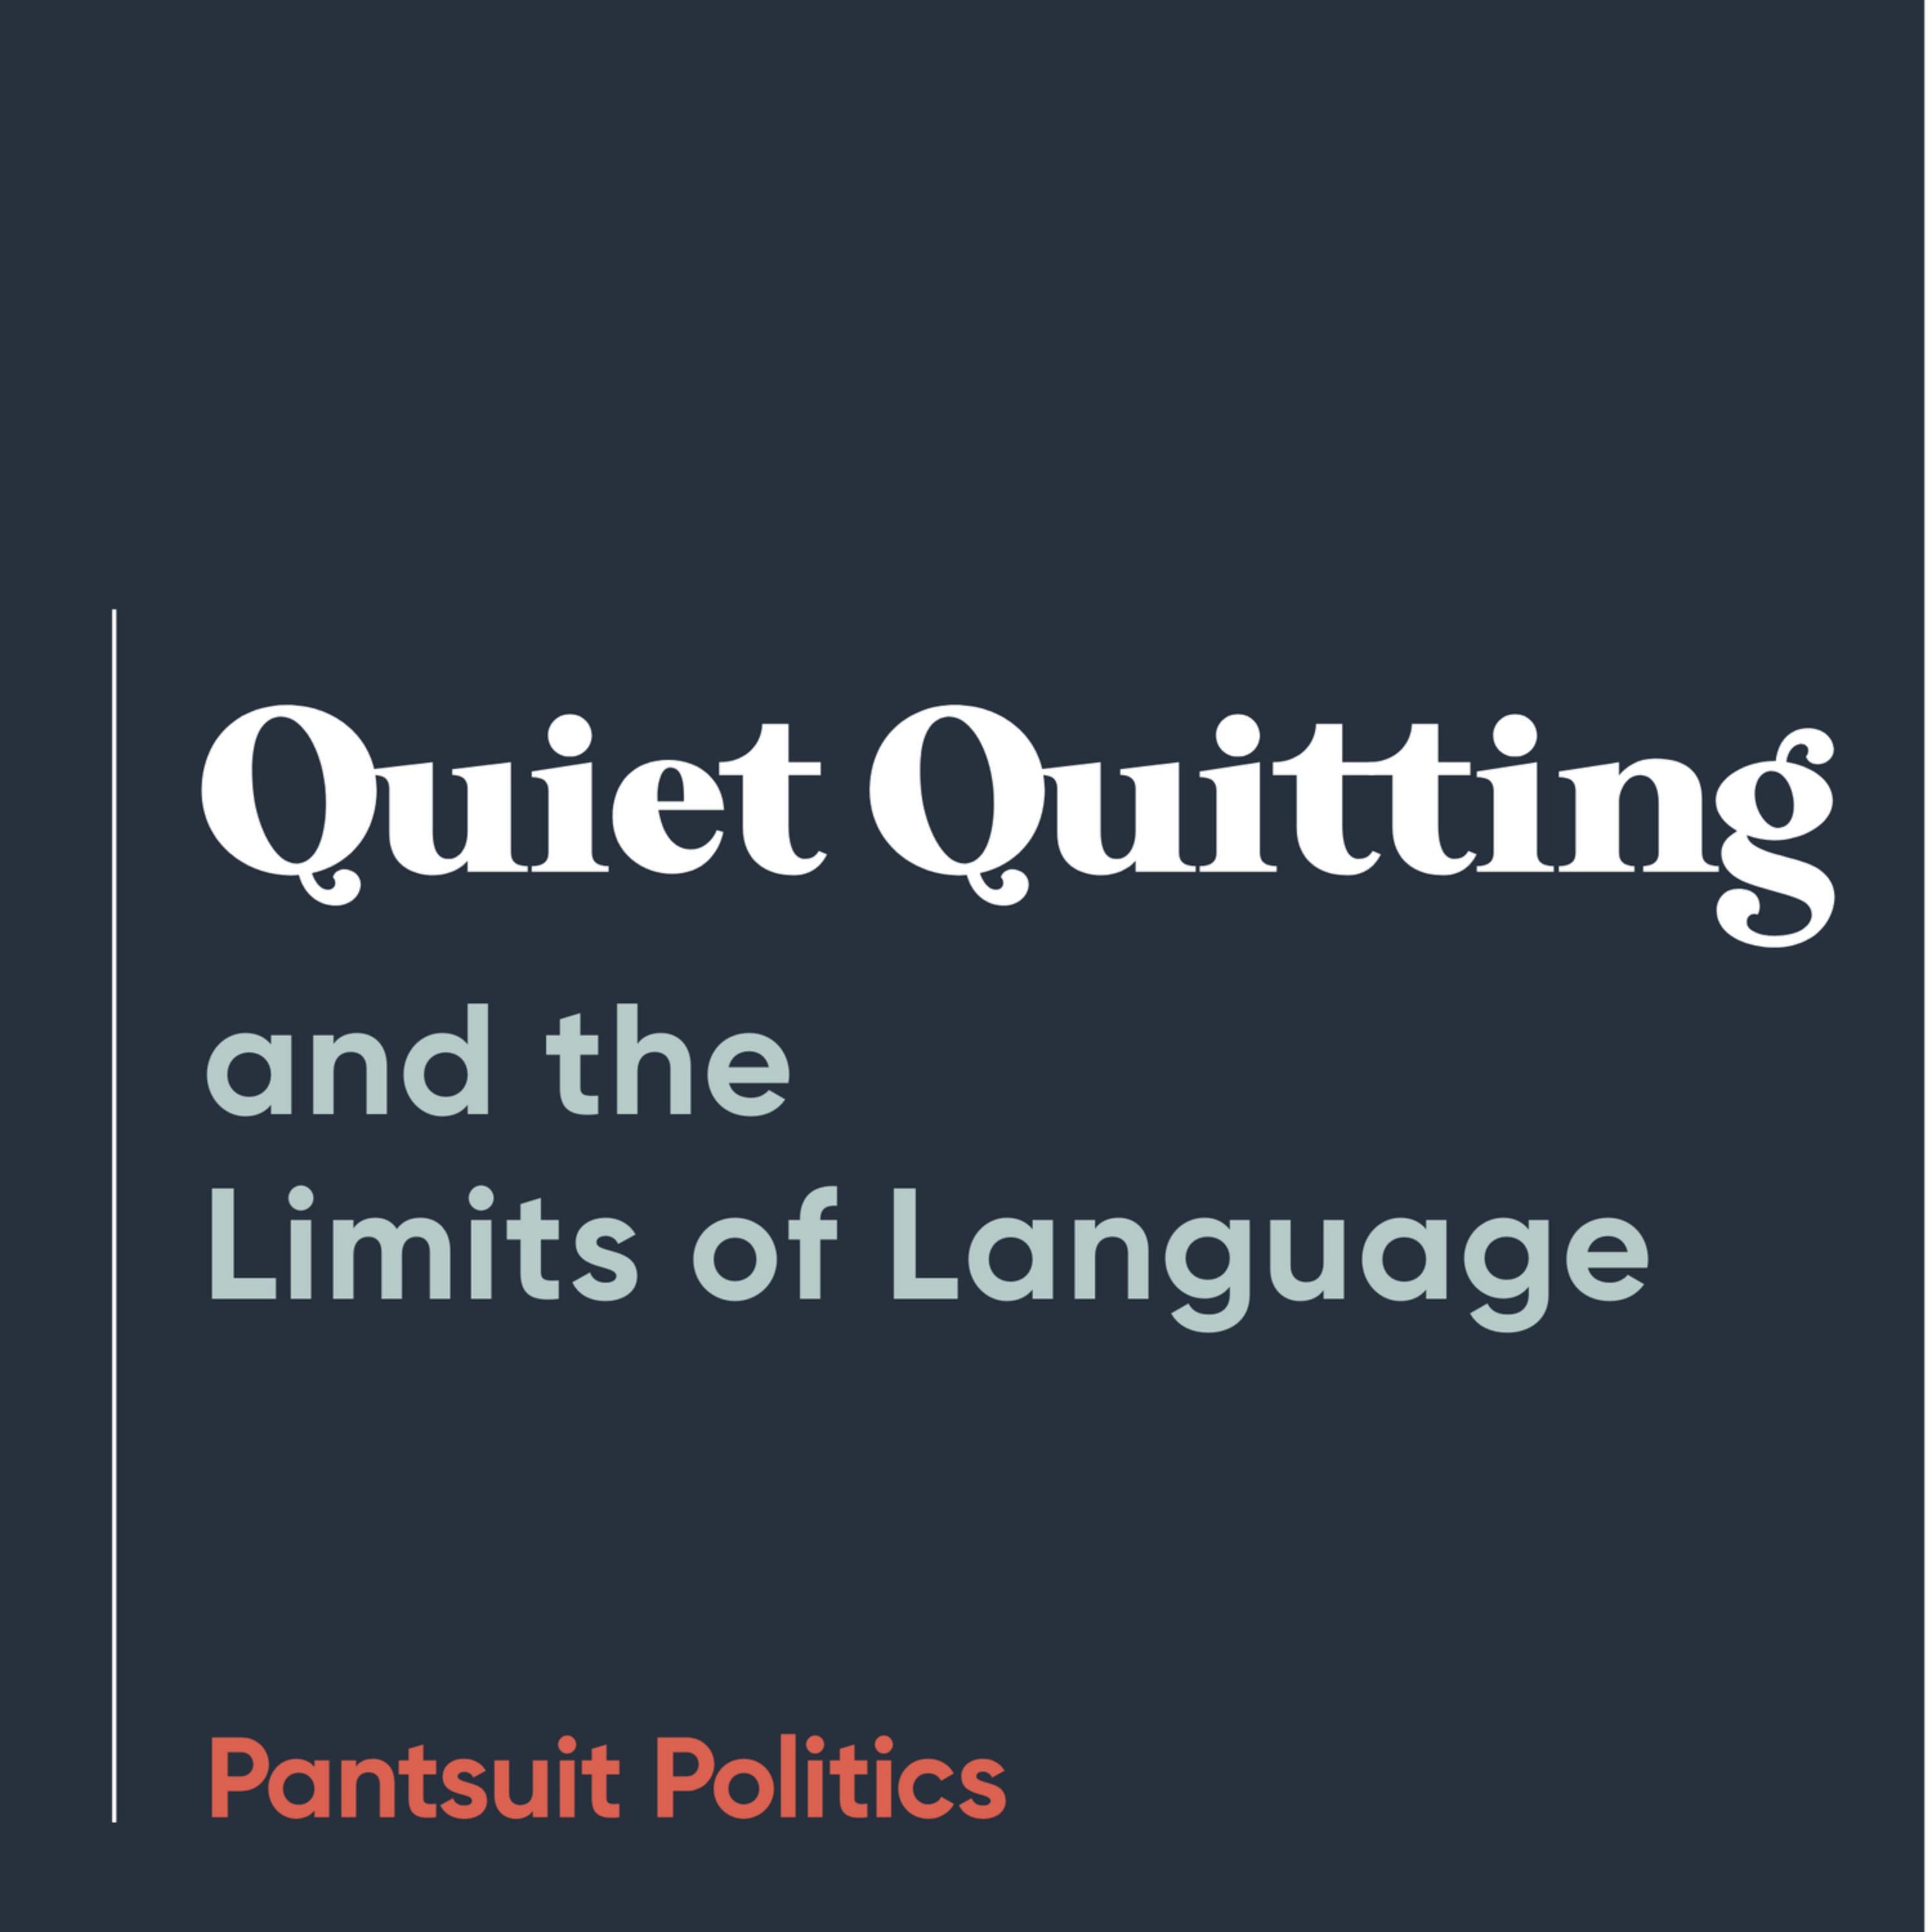 Quiet Quitting and the Limits of Language